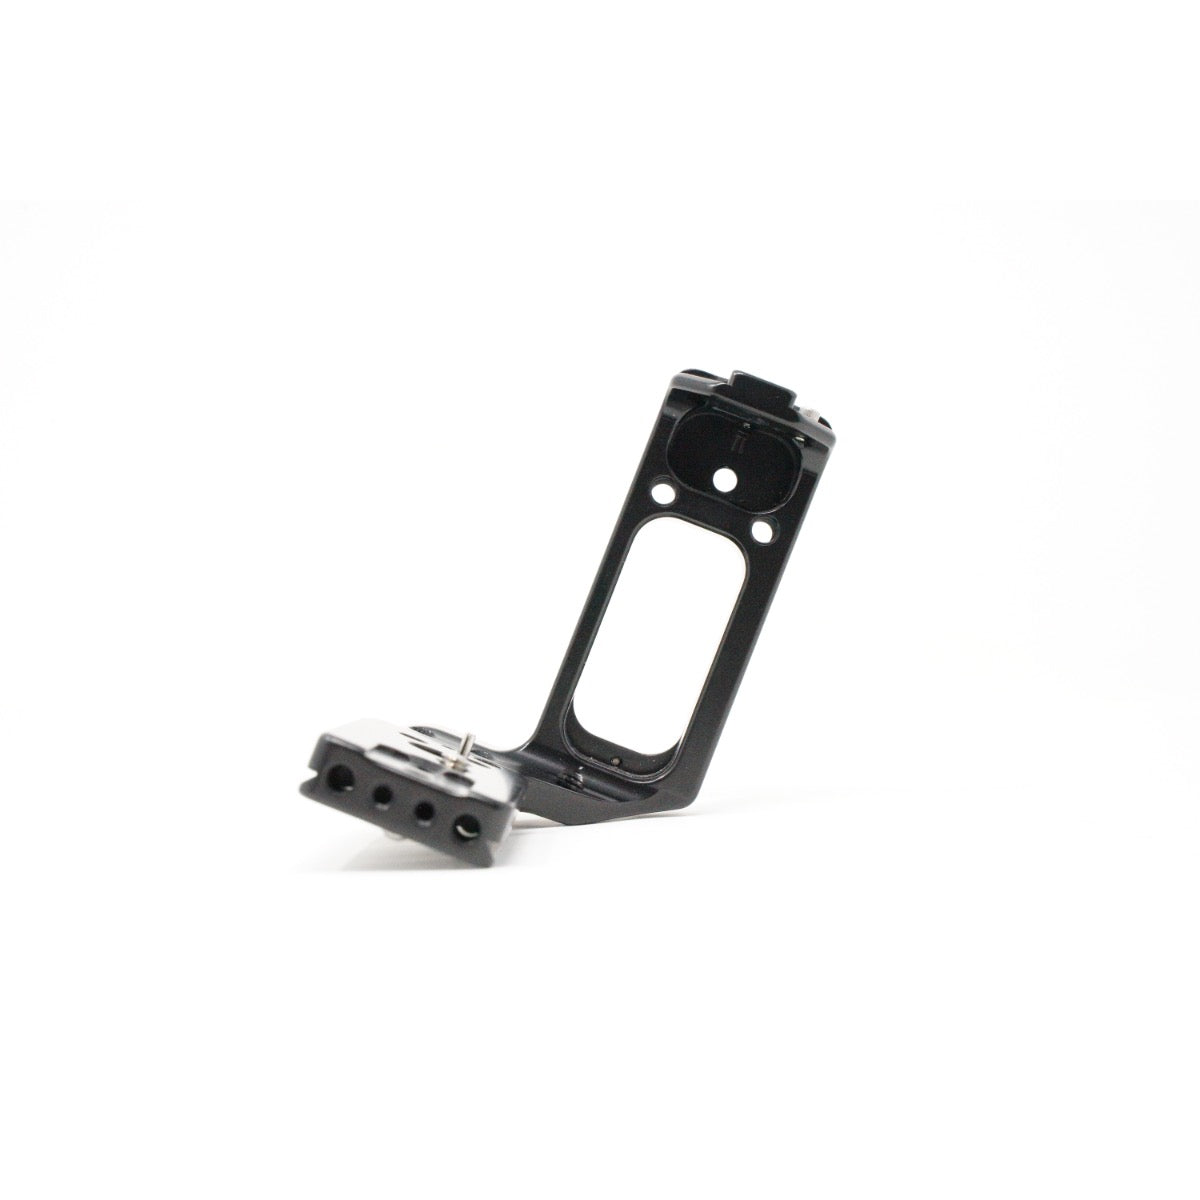 USED L-Bracket for Canon EOS R3 Mirrorless Camera